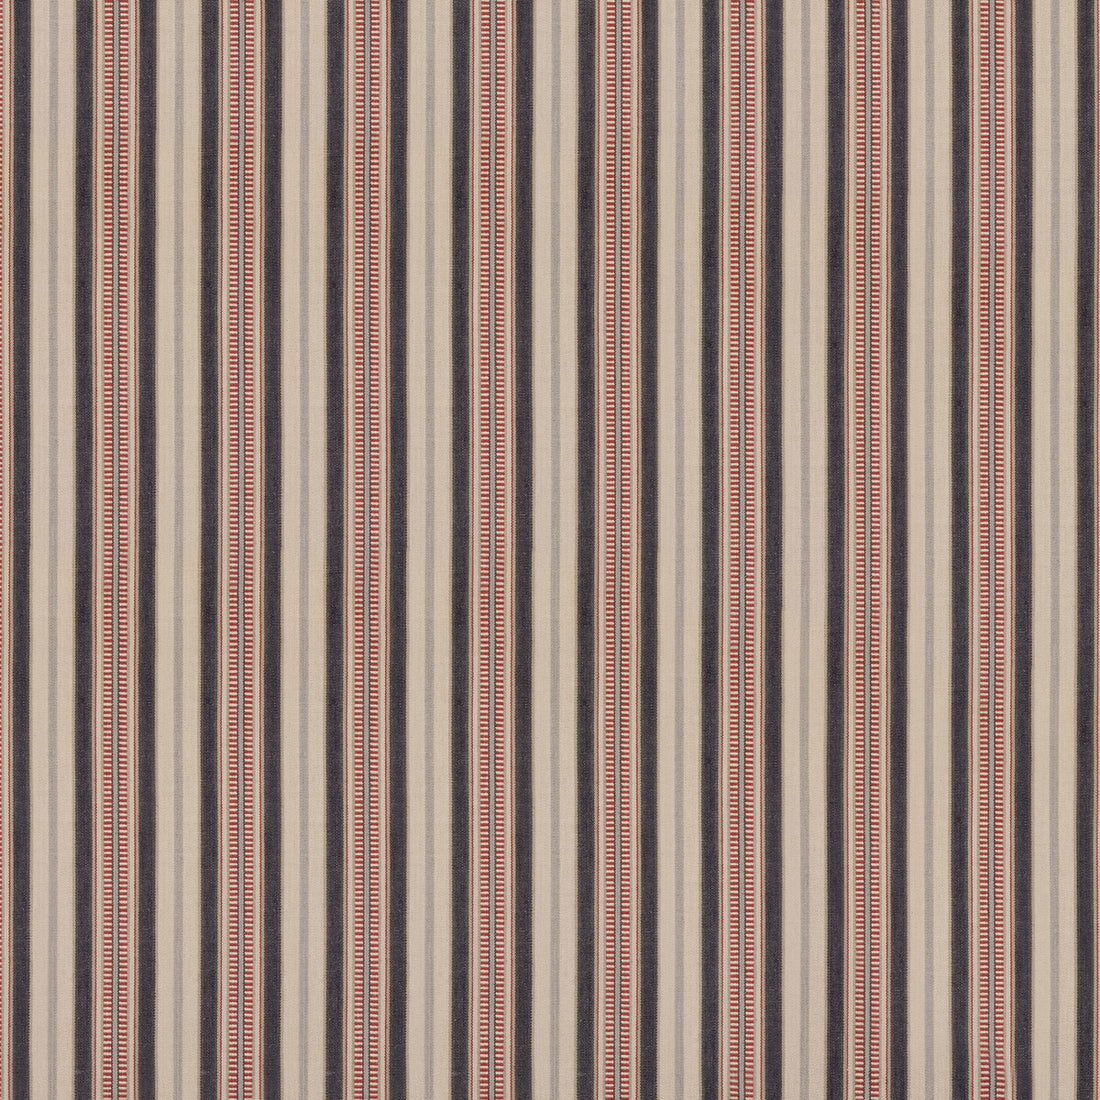 Shelter Stripe fabric in indigo/red color - pattern FD820.G103.0 - by Mulberry in the Westerly Stripes collection